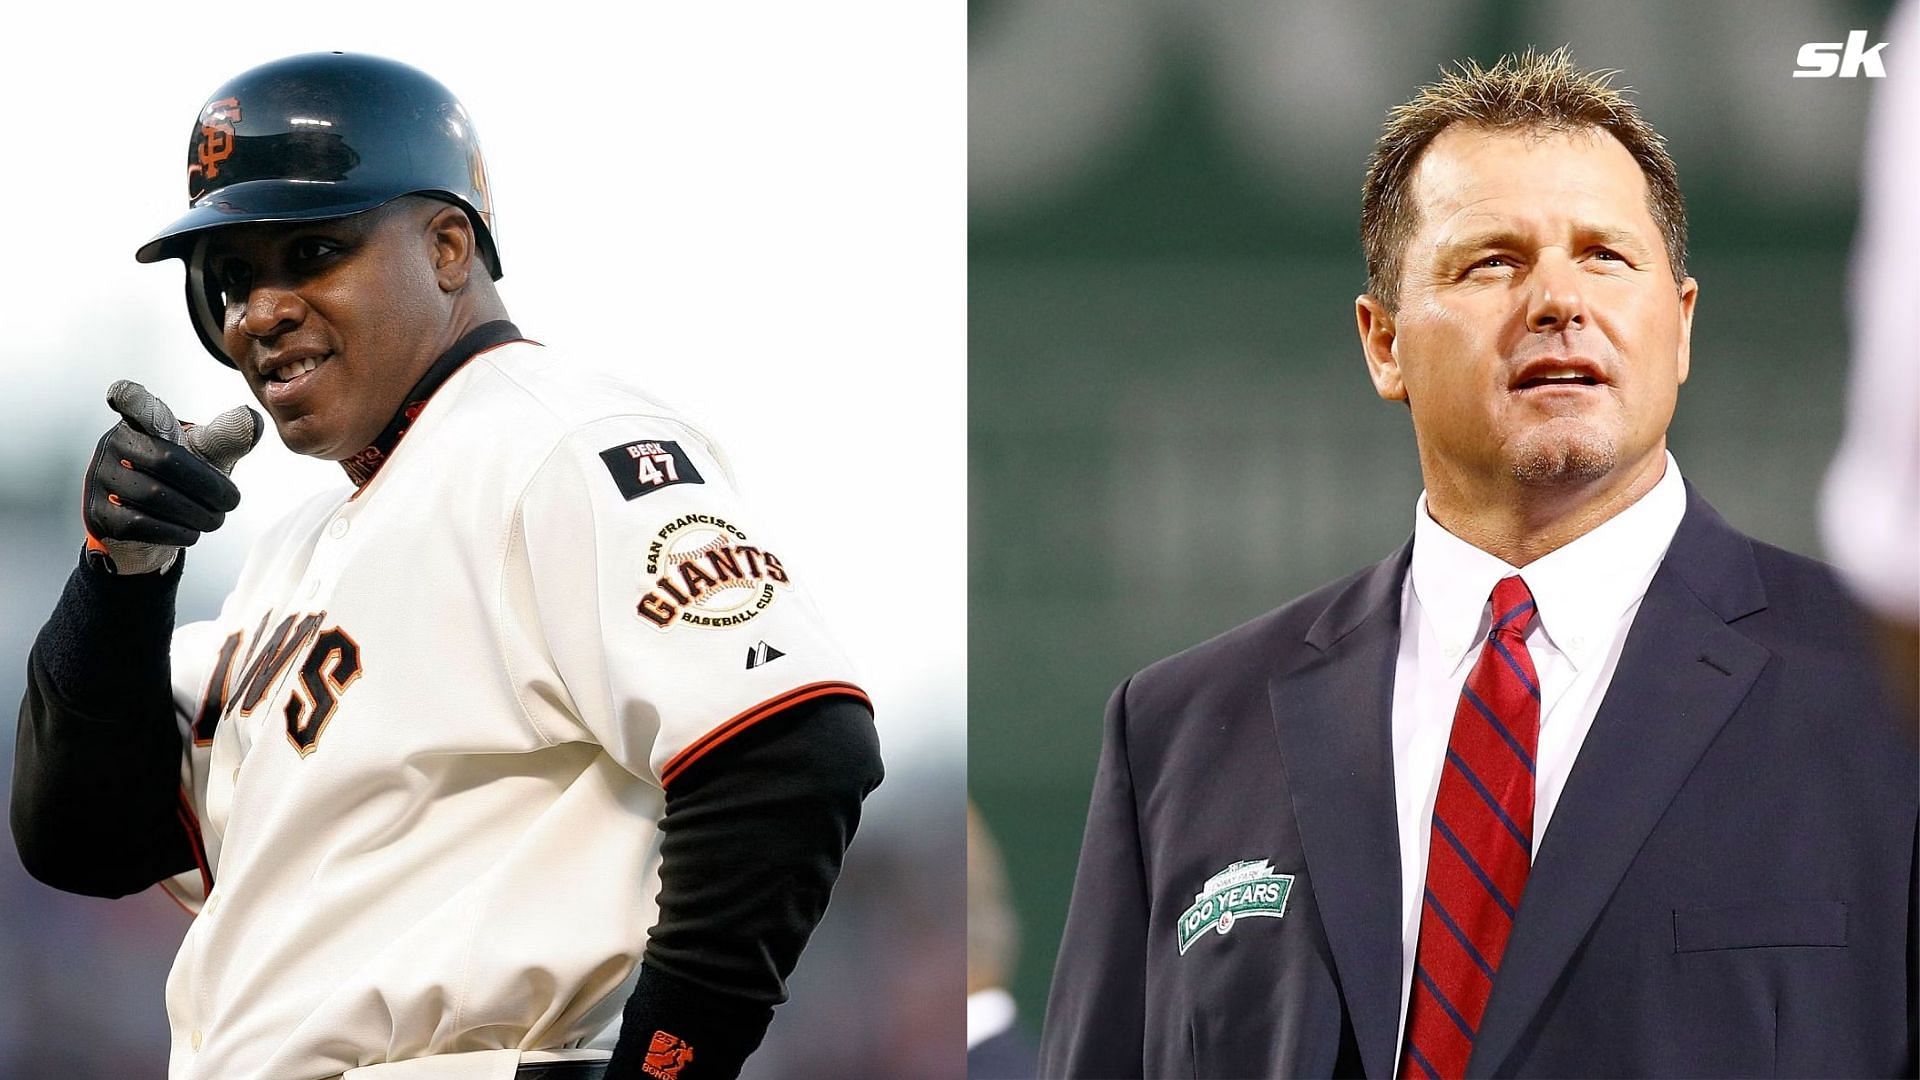 Roger Clemens' Baseball Hall of Fame case tarnished by PED allegations